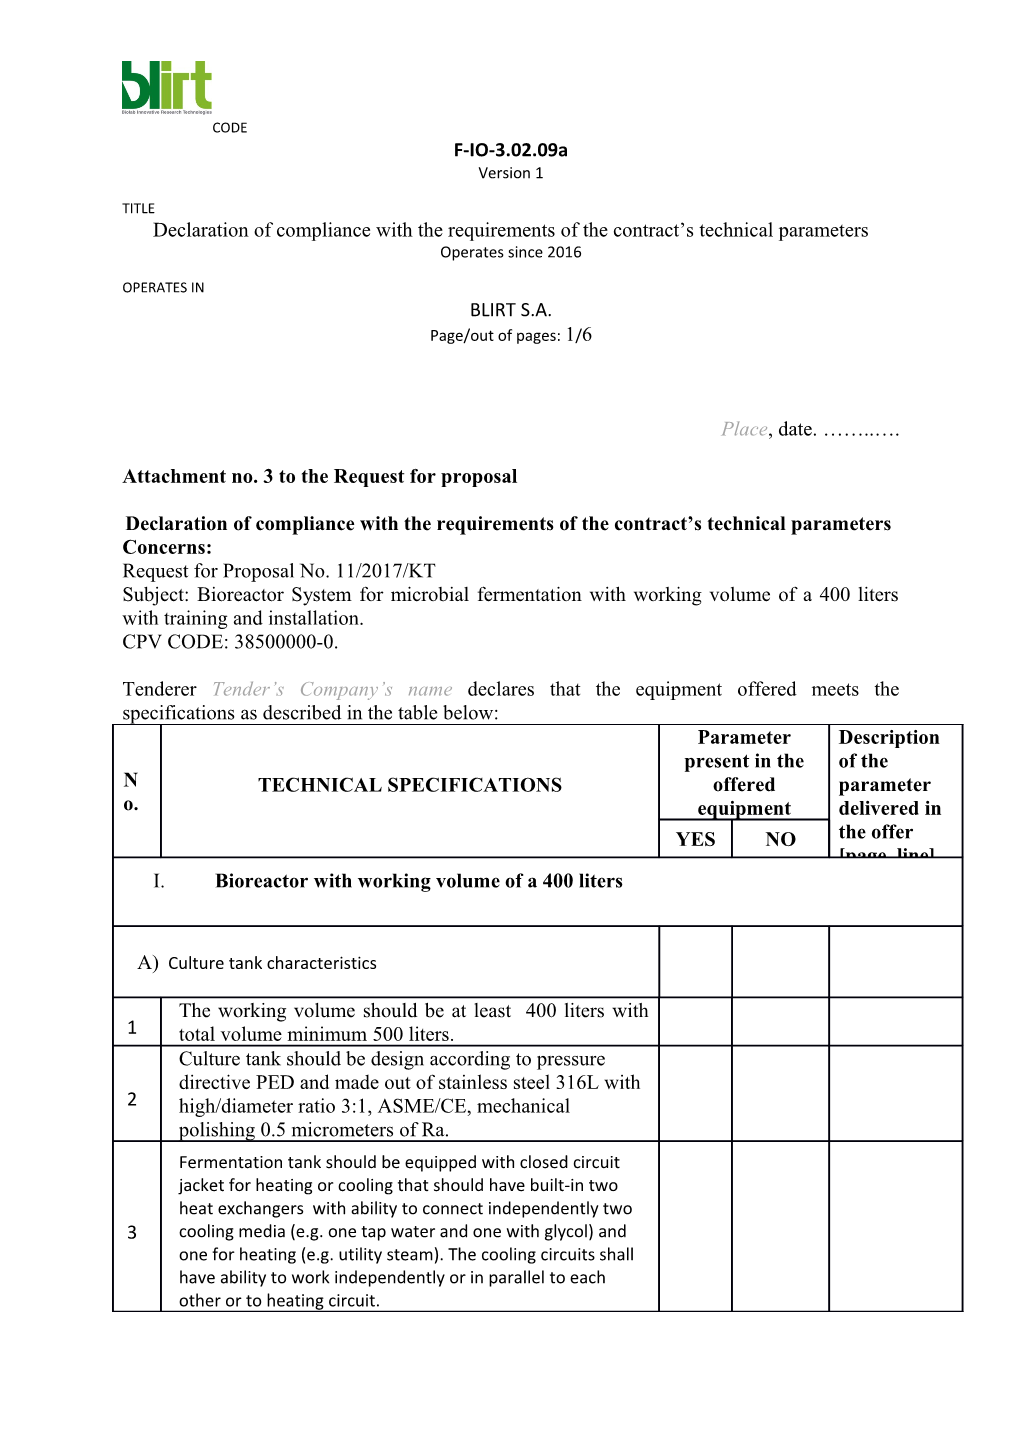 Attachment No. 3 to the Request for Proposal